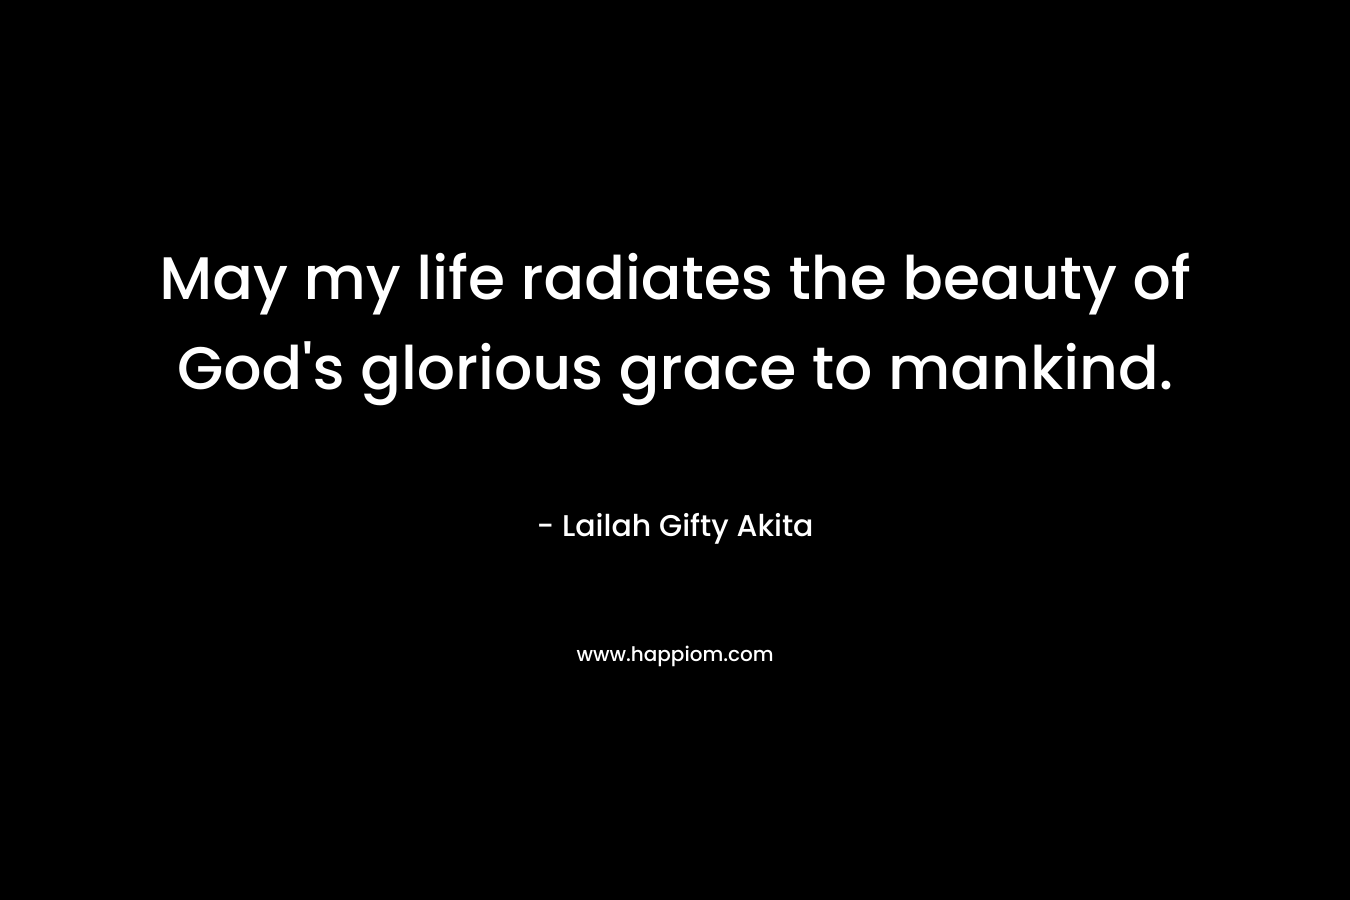 May my life radiates the beauty of God's glorious grace to mankind.